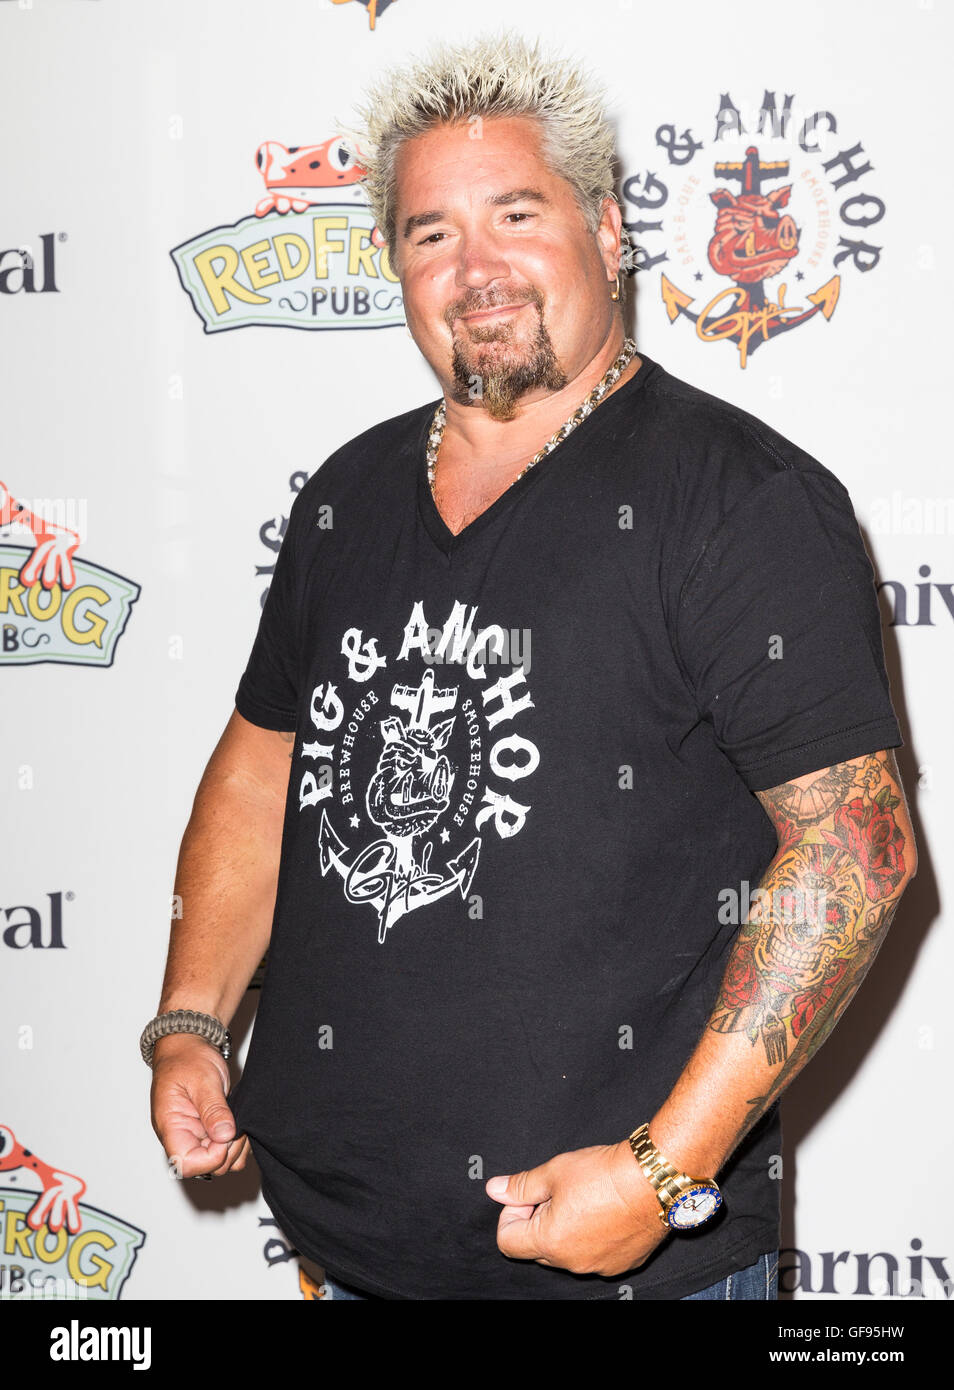 New York, NY USA - July 27, 2016: Chef Guy Fieri presented designed for Carnival cruises Open-Air Barbeque Eatery at Beer-B-Que on roof garden 620 Loft and Garden Stock Photo